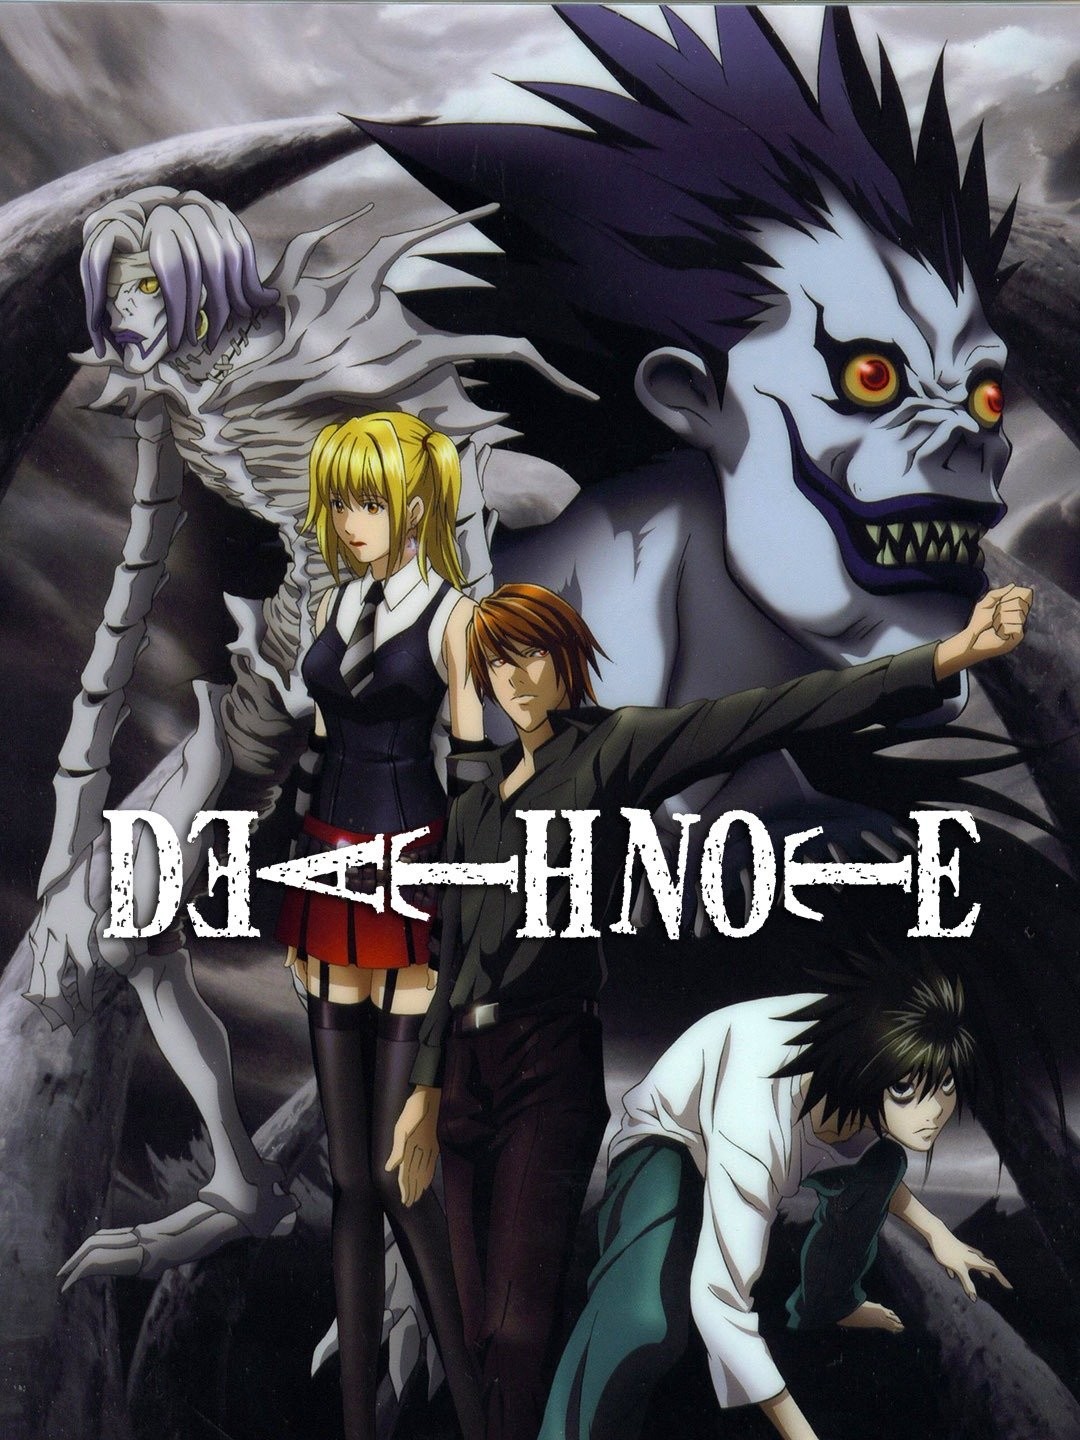 This ANIME is BETTER than DEATH NOTE! 